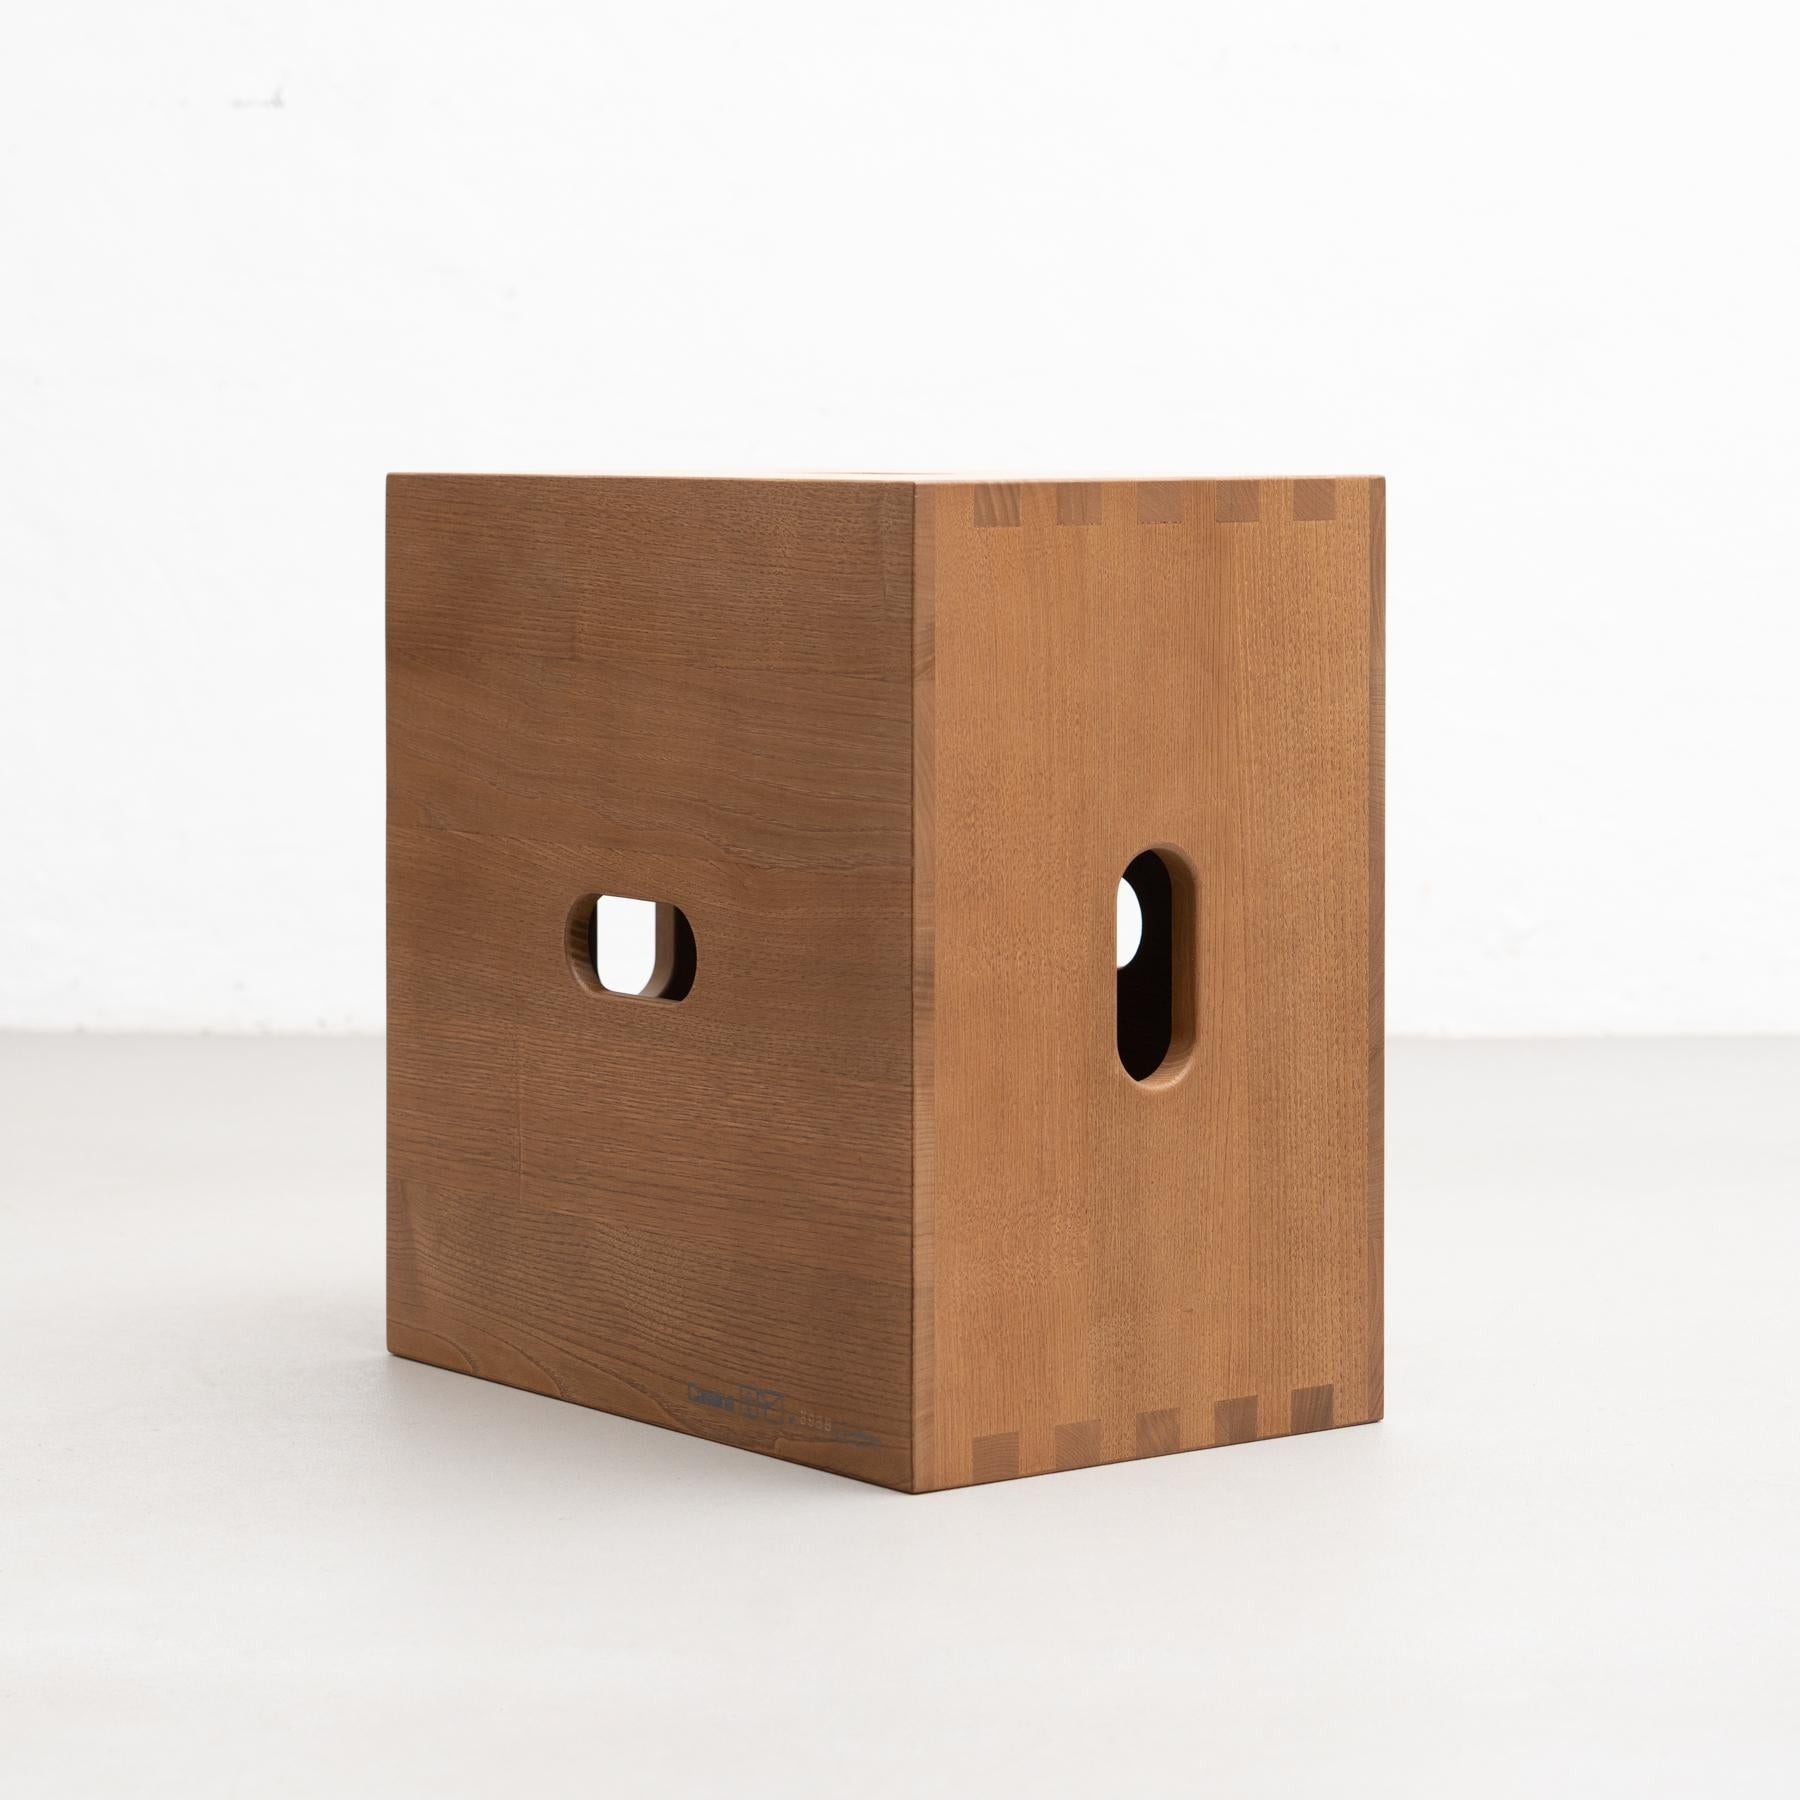 Contemporary Le Corbusier LC14 Cabanon Wood Stool by Cassina